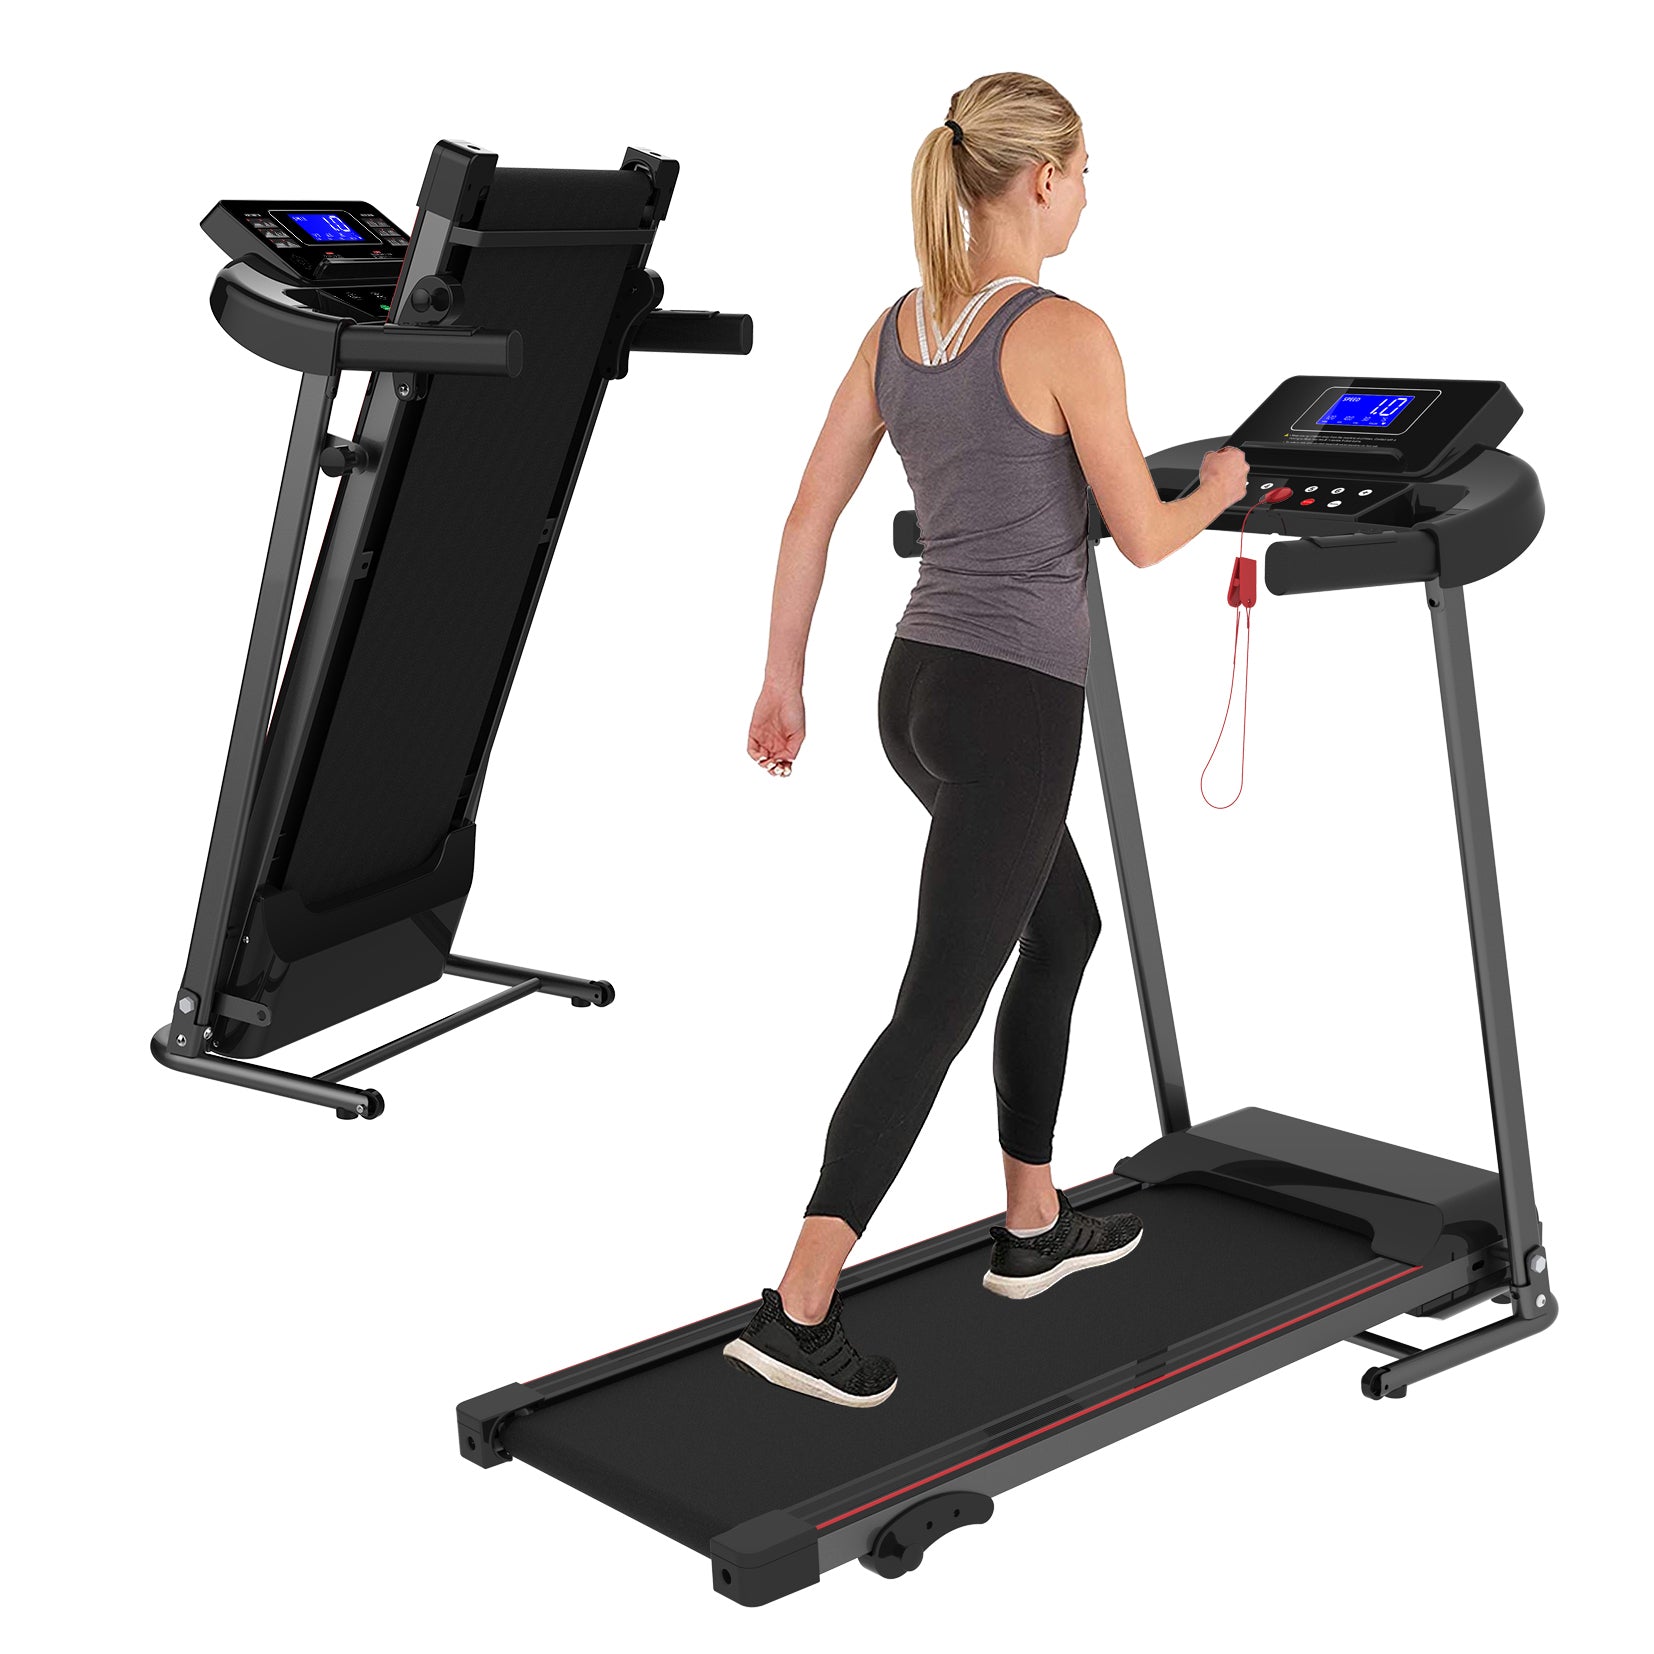 Home Use Max 2.5HP 250 LBS Capacity Incline Multi-function Foldable Electric Treadmill